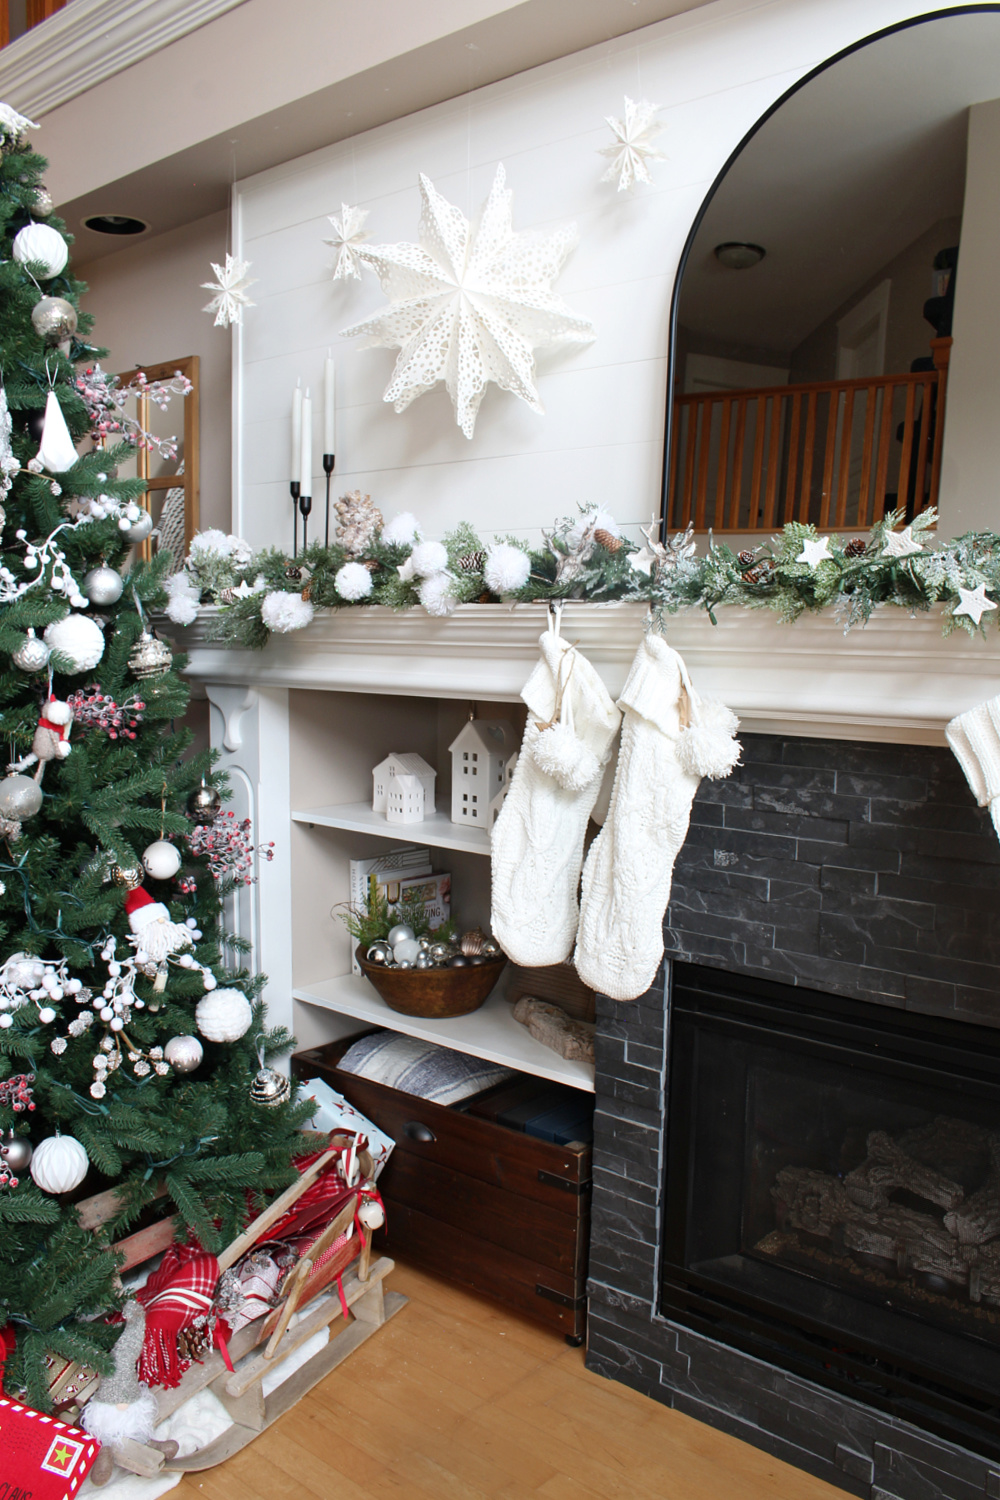 Winter wonderland Christmas mantel with snowball garland and paper snowflakes.